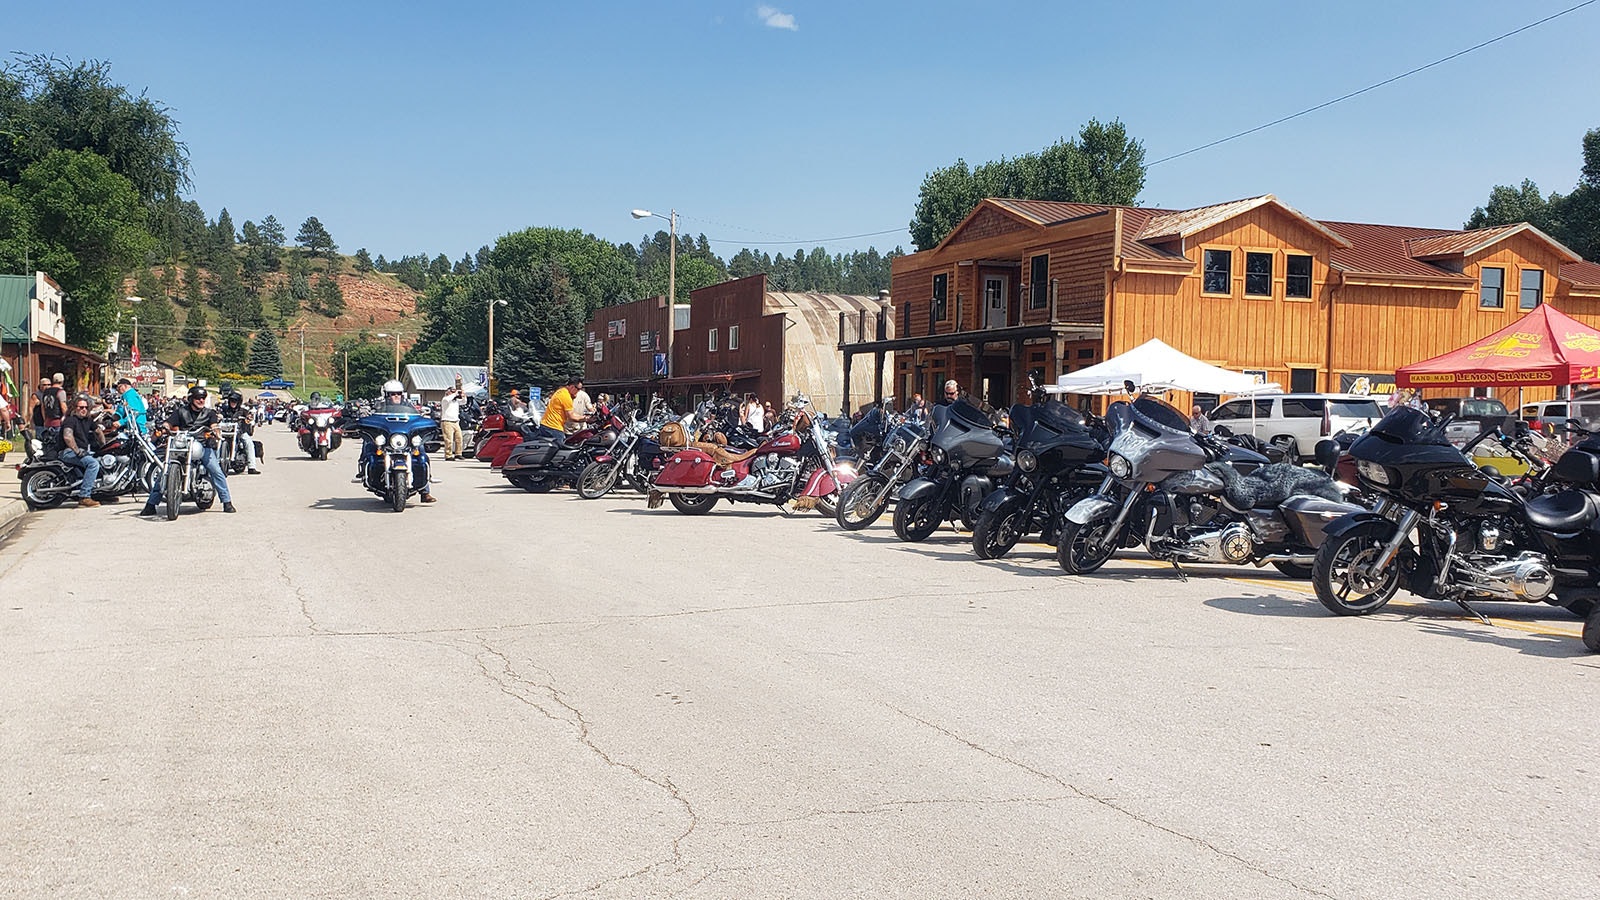 The bikes seem to never stop rolling into tiny Hulett, Wyoming, for the annual Ham-N-Jam, when the Sturgis Motorcycle Rally brings about 25,000 more people than the town's normal 300 residents.